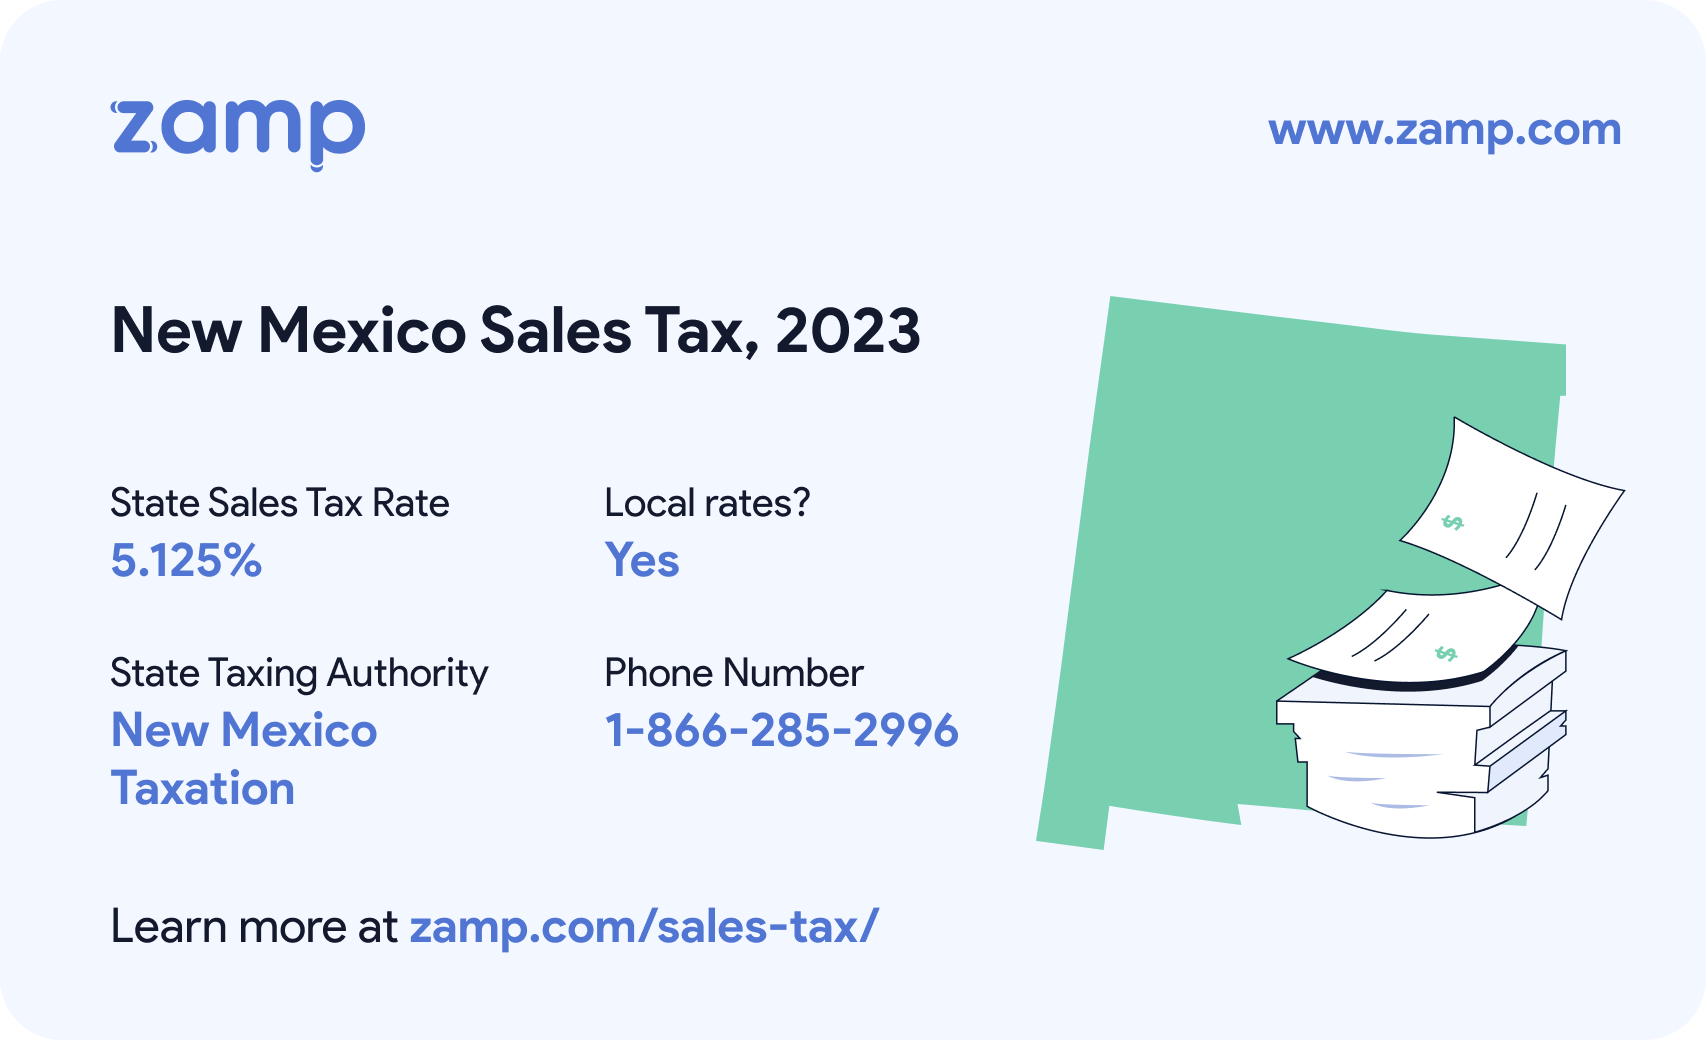 New Mexico basic sales tax info for 2023 - State sales tax rate: 5.125%, Local rates? Yes; State Taxing Authority: New Mexico Taxation; and phone number 1-866-285-2996